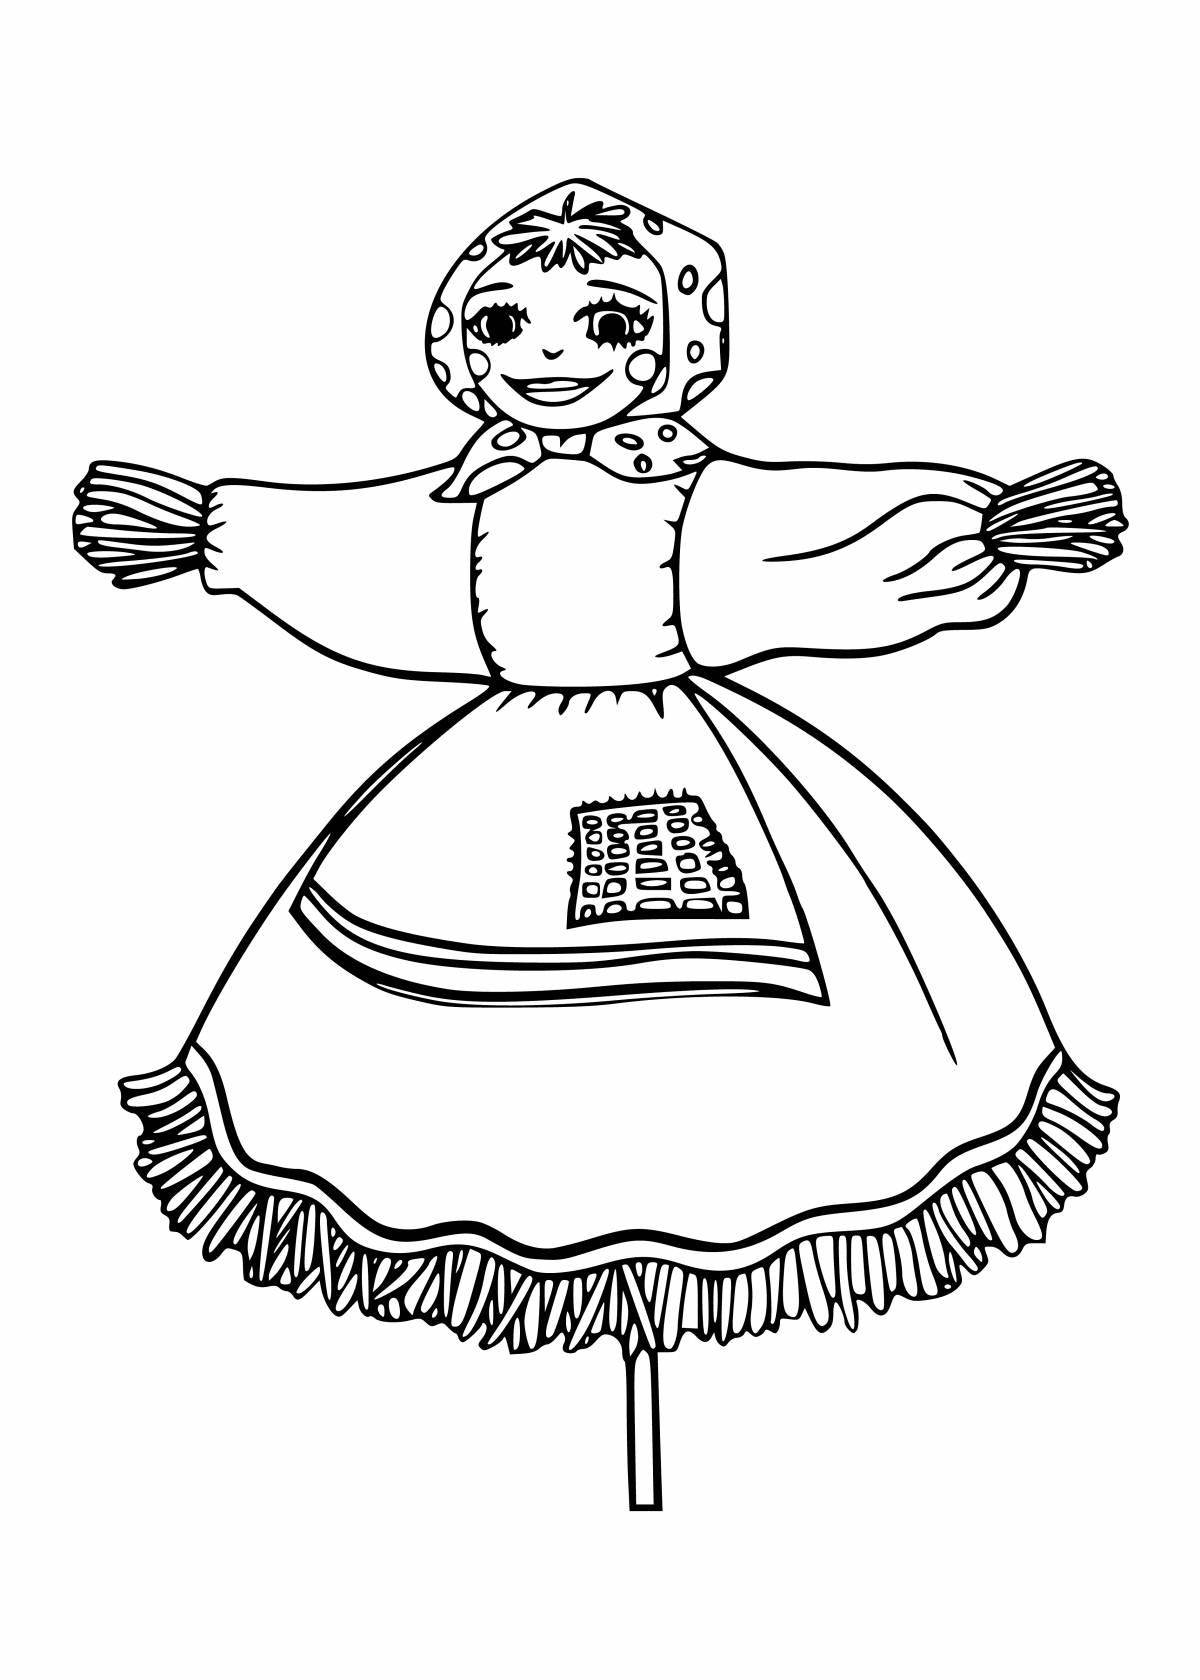 Sparkling Shrove Tuesday coloring page